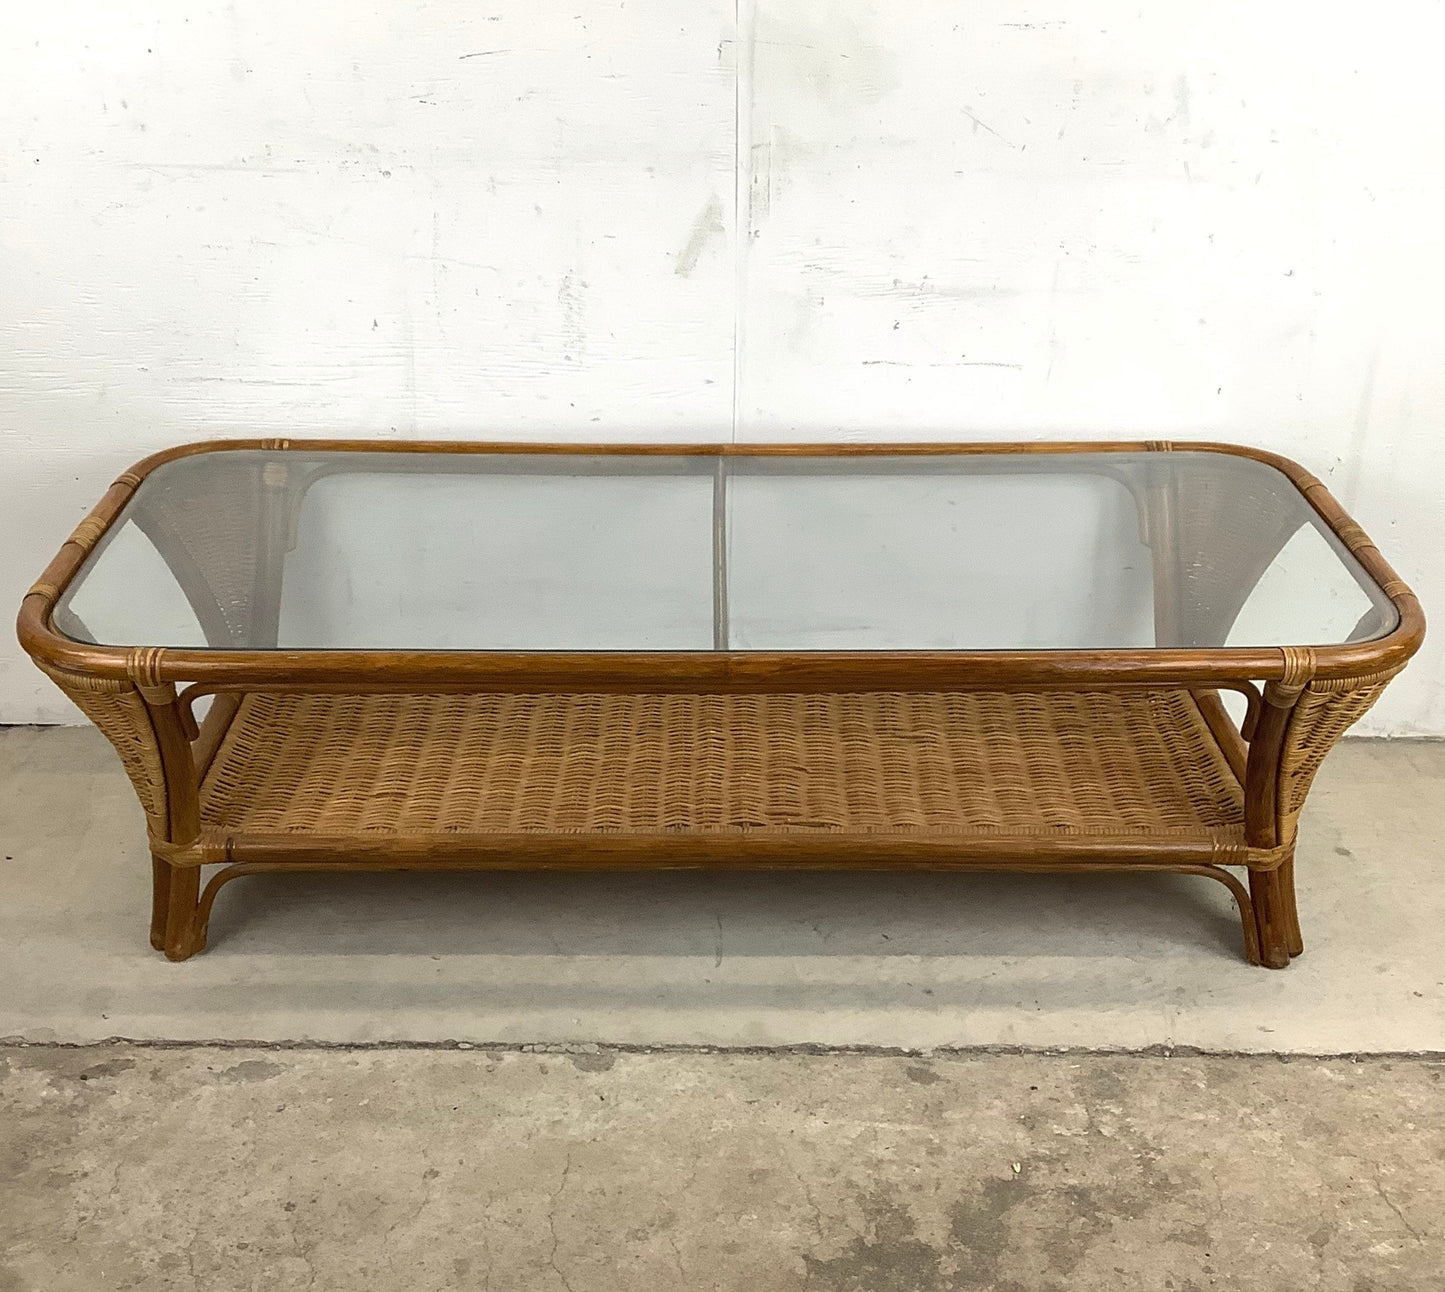 Vintage Modern Boho Coffee Table With Bamboo and Wicker